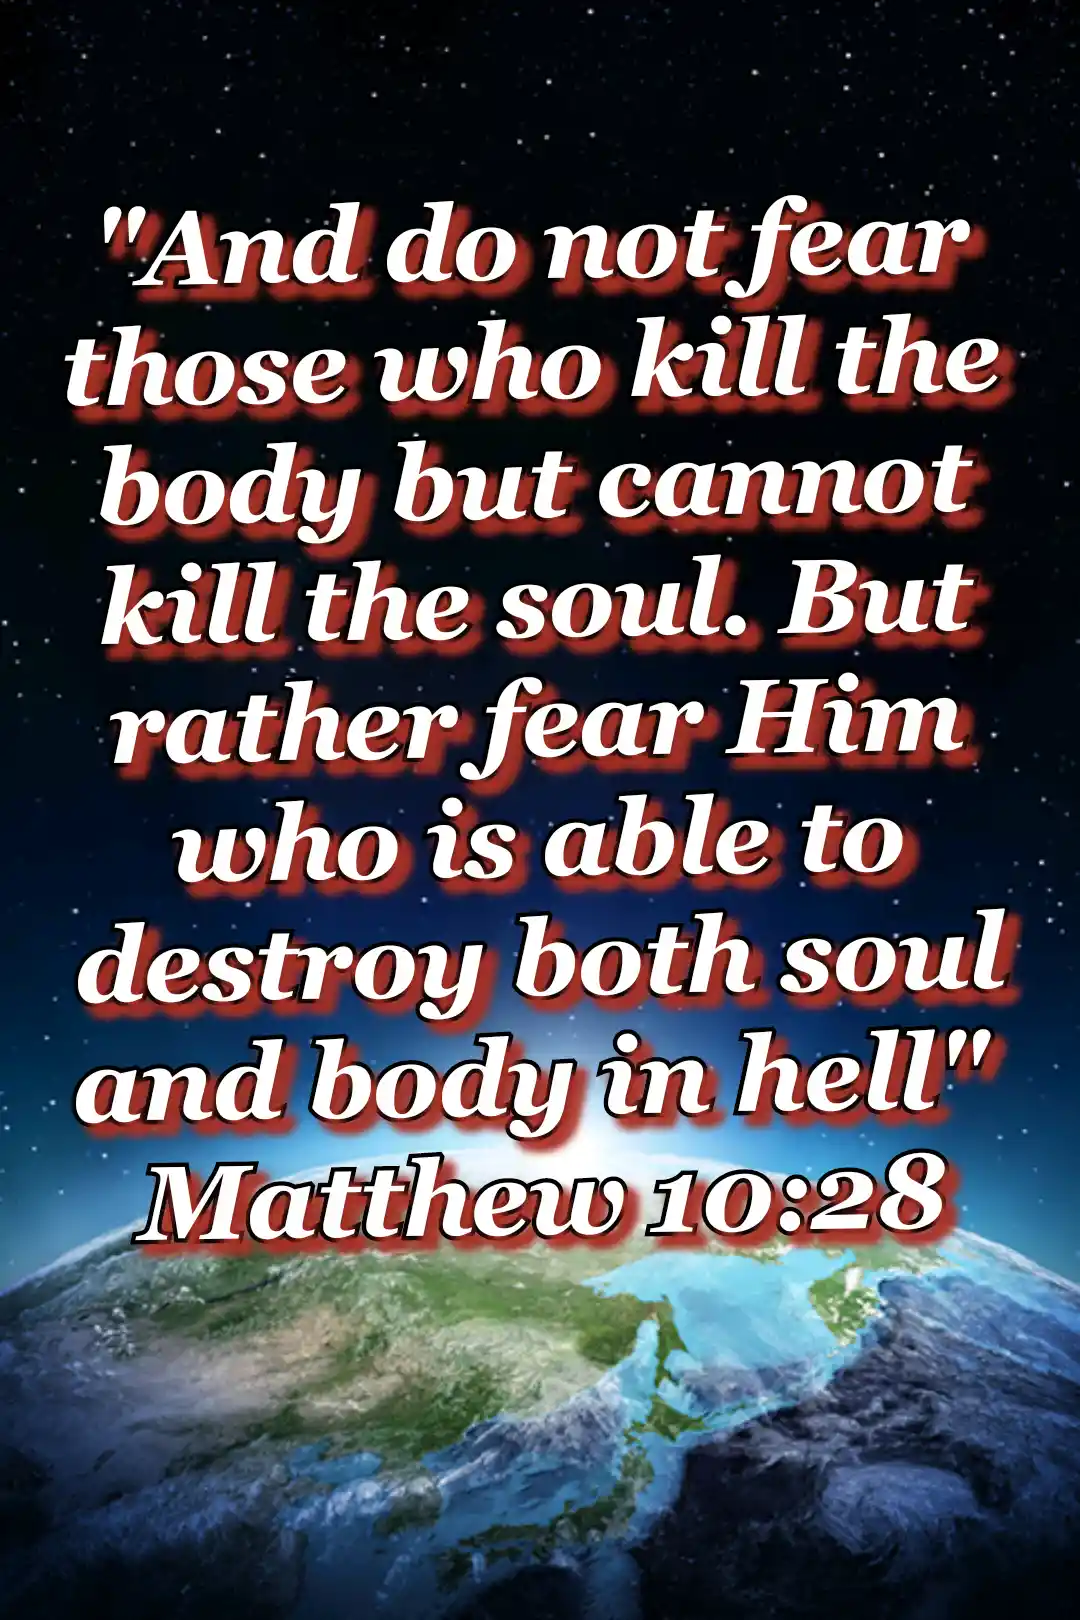 bible verses about your soul and heart (Matthew 10:28)